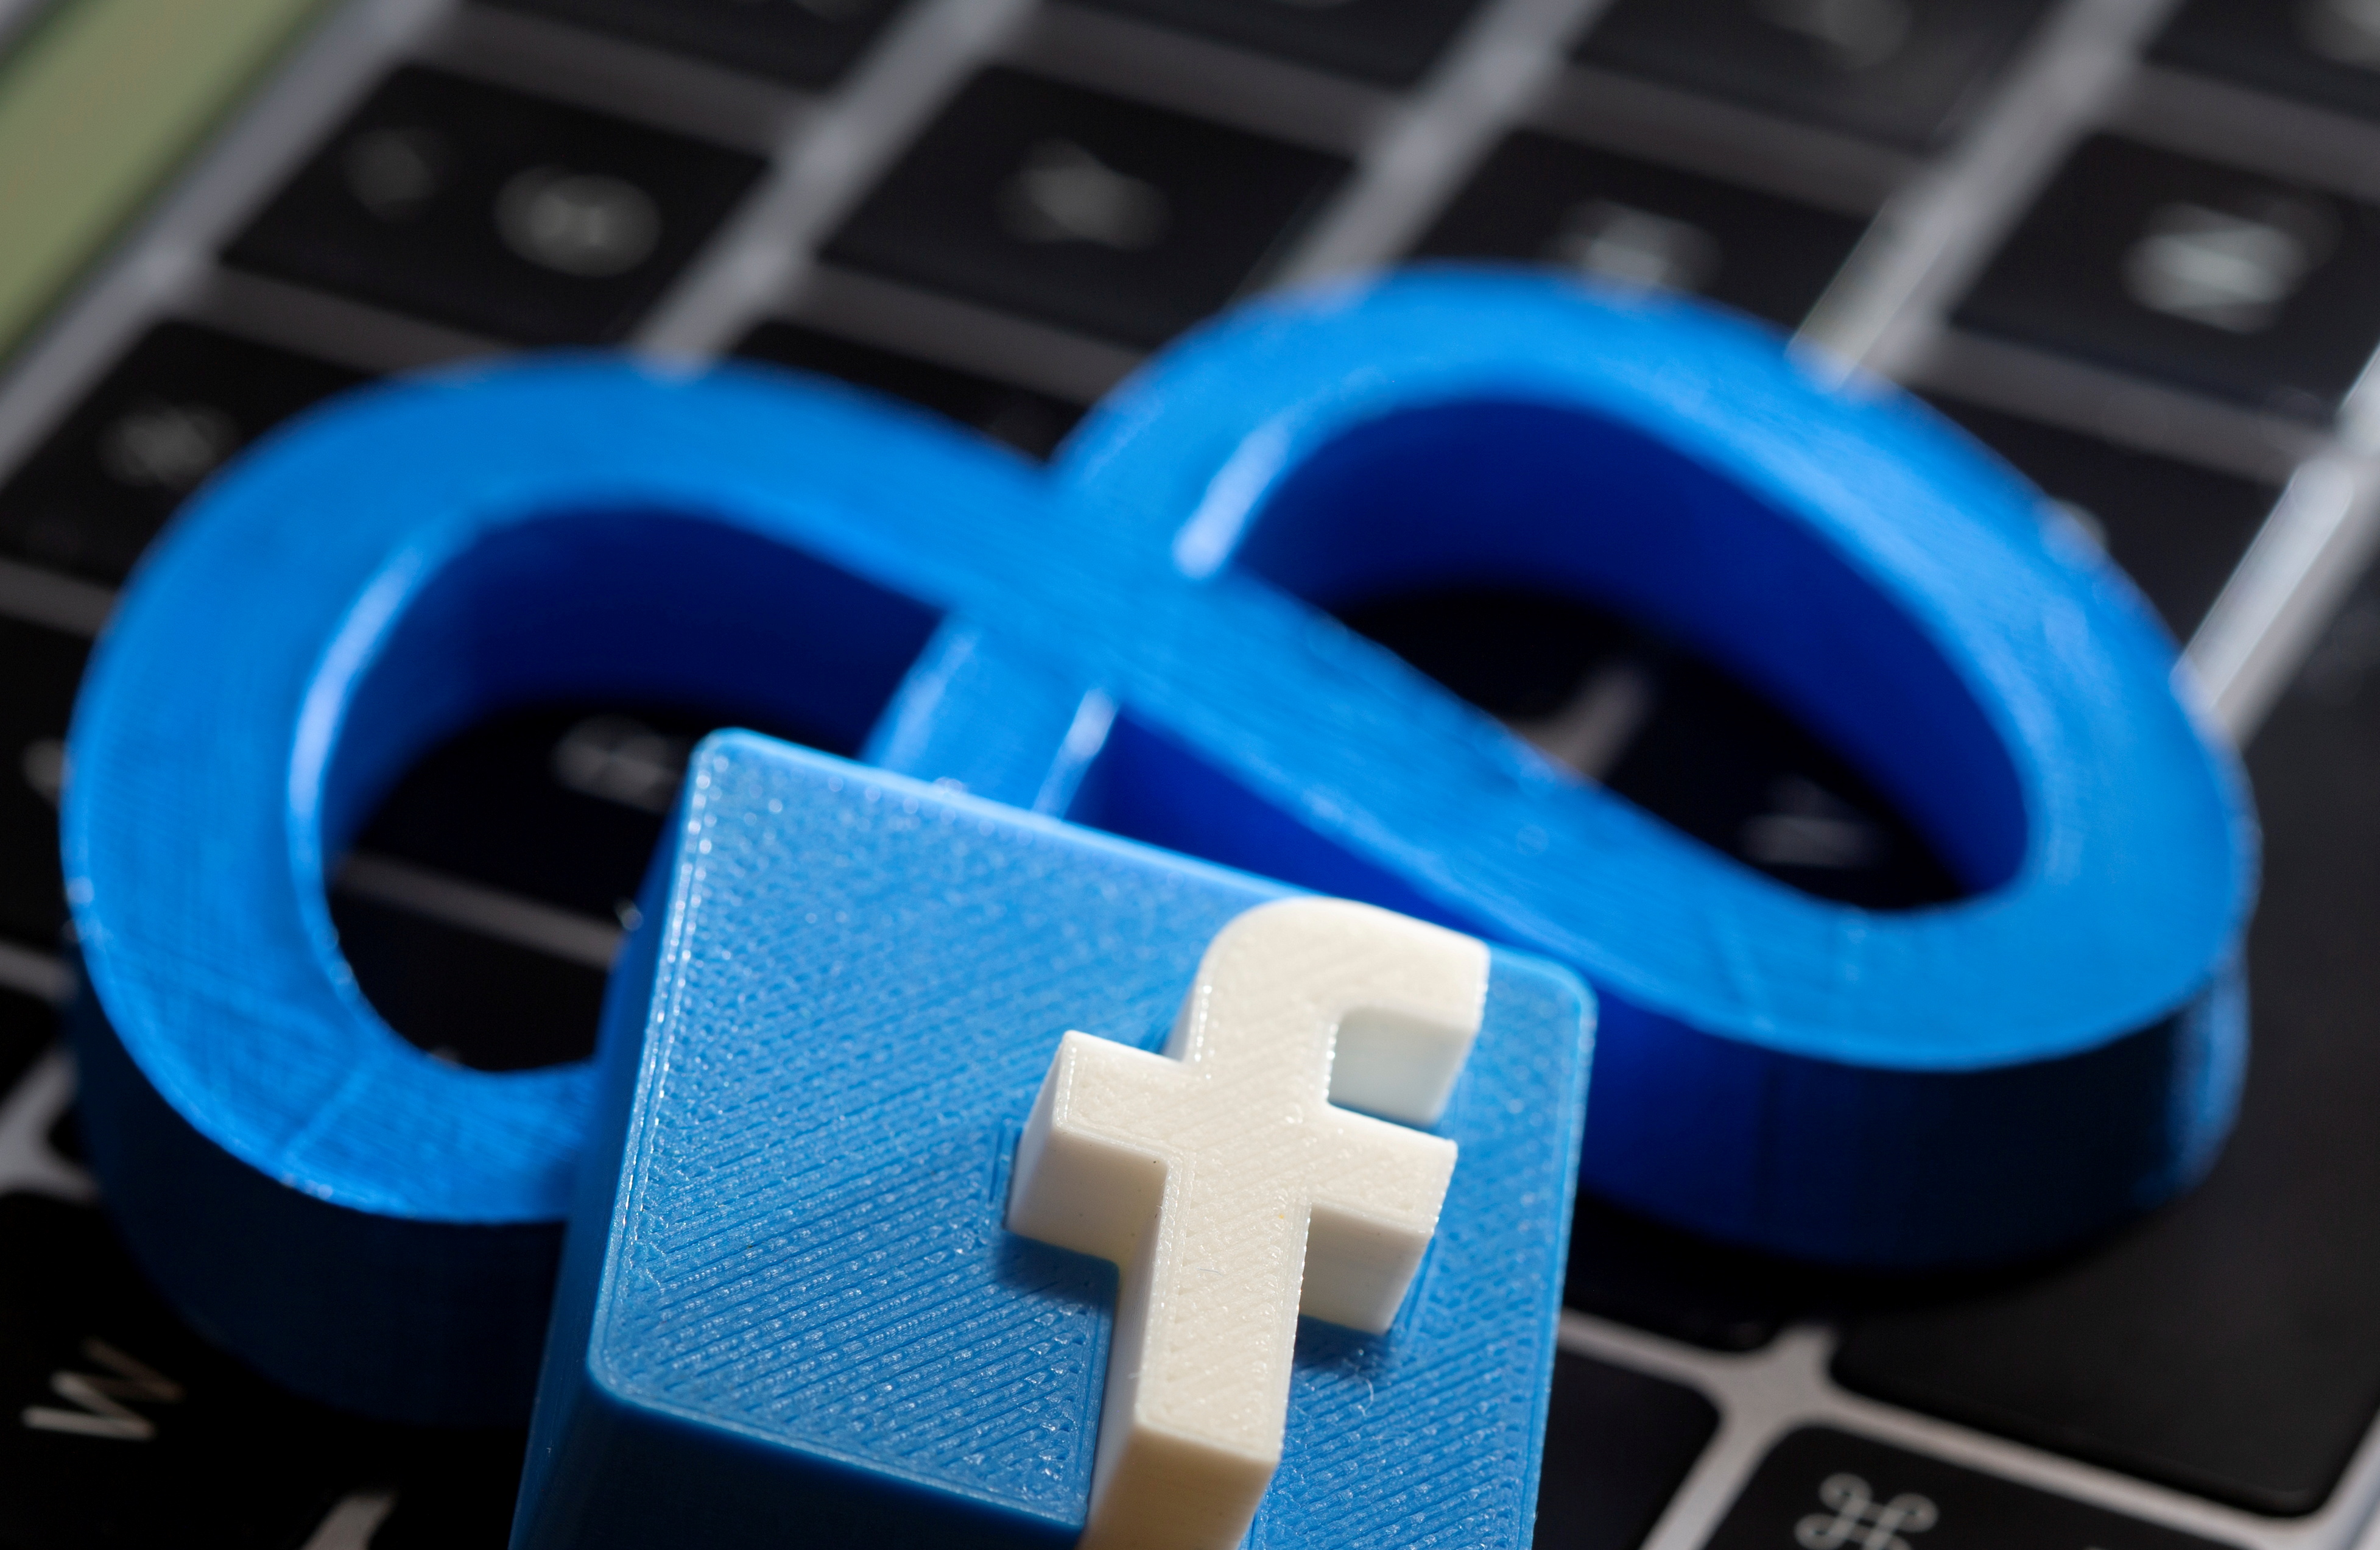 A 3D printed Facebook's new rebrand logo Meta and Facebook logo are placed on laptop keyboard in this illustration taken on November 2, 2021. REUTERS/Dado Ruvic/Illustration/File Photo